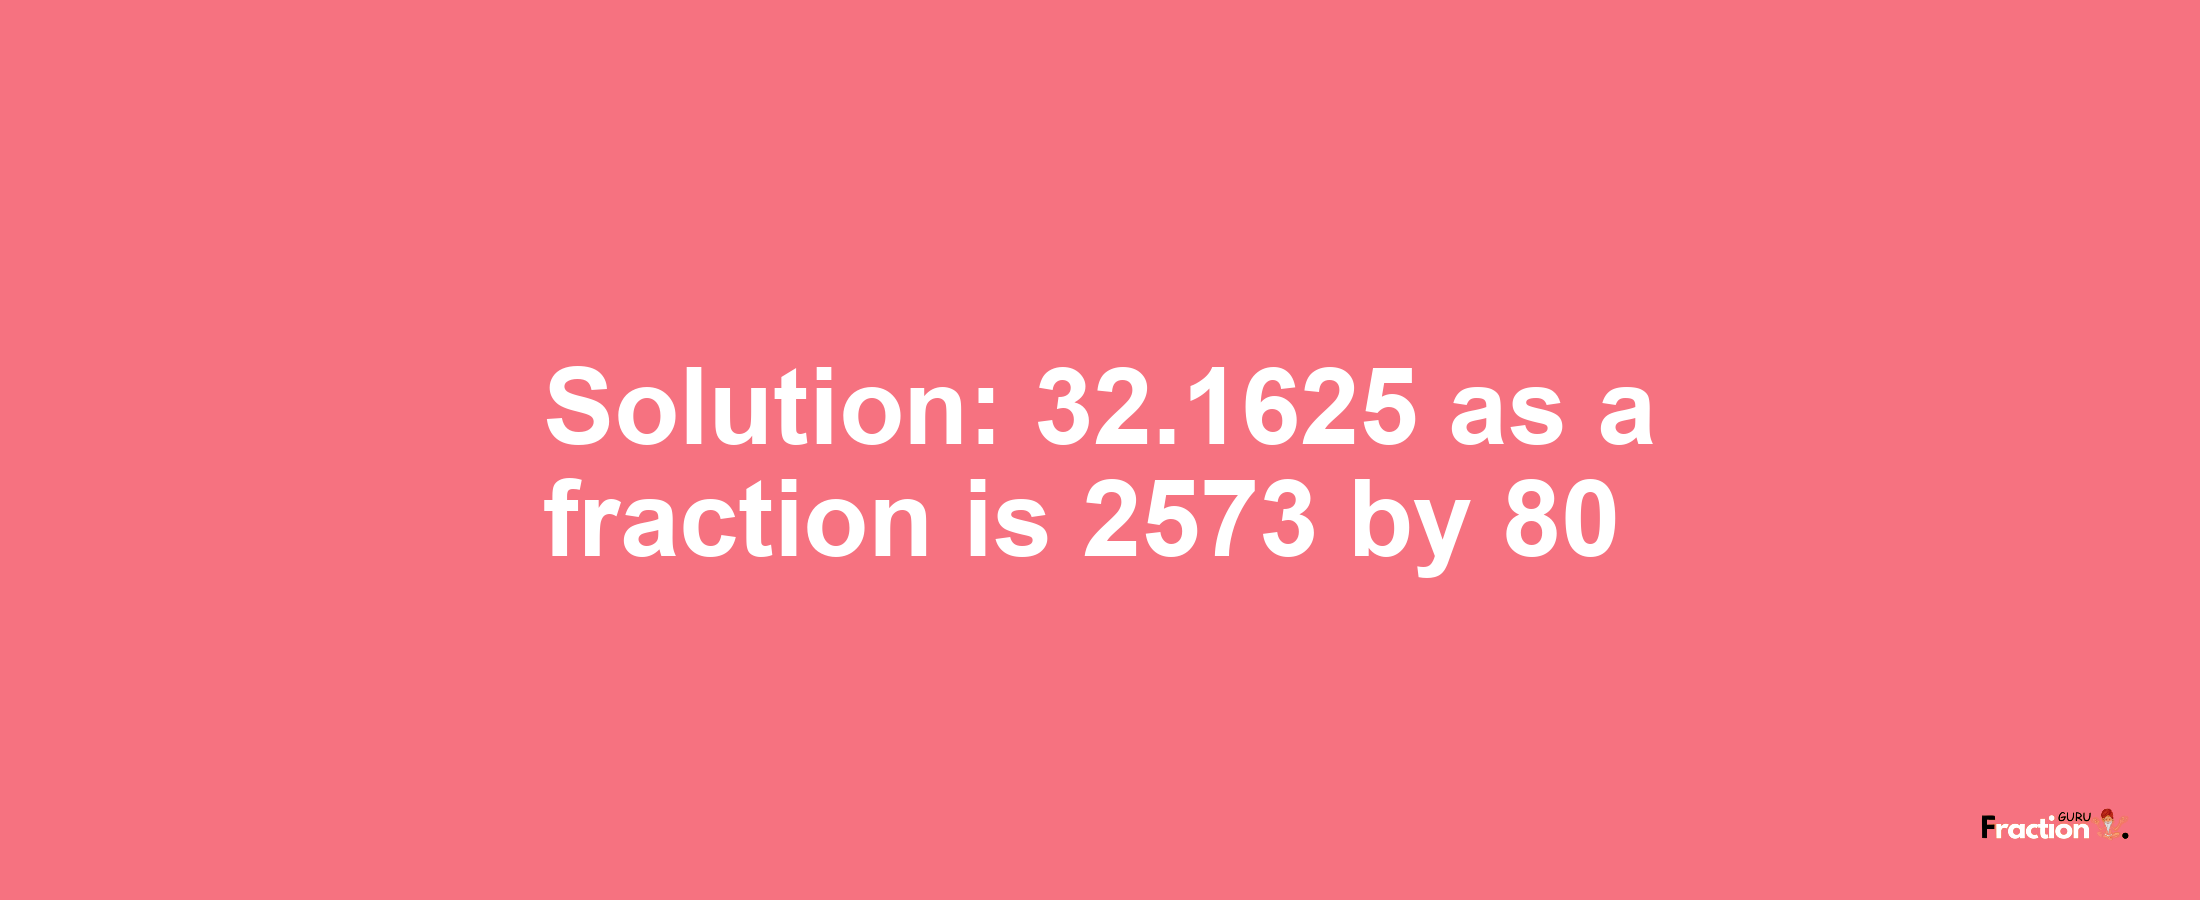 Solution:32.1625 as a fraction is 2573/80